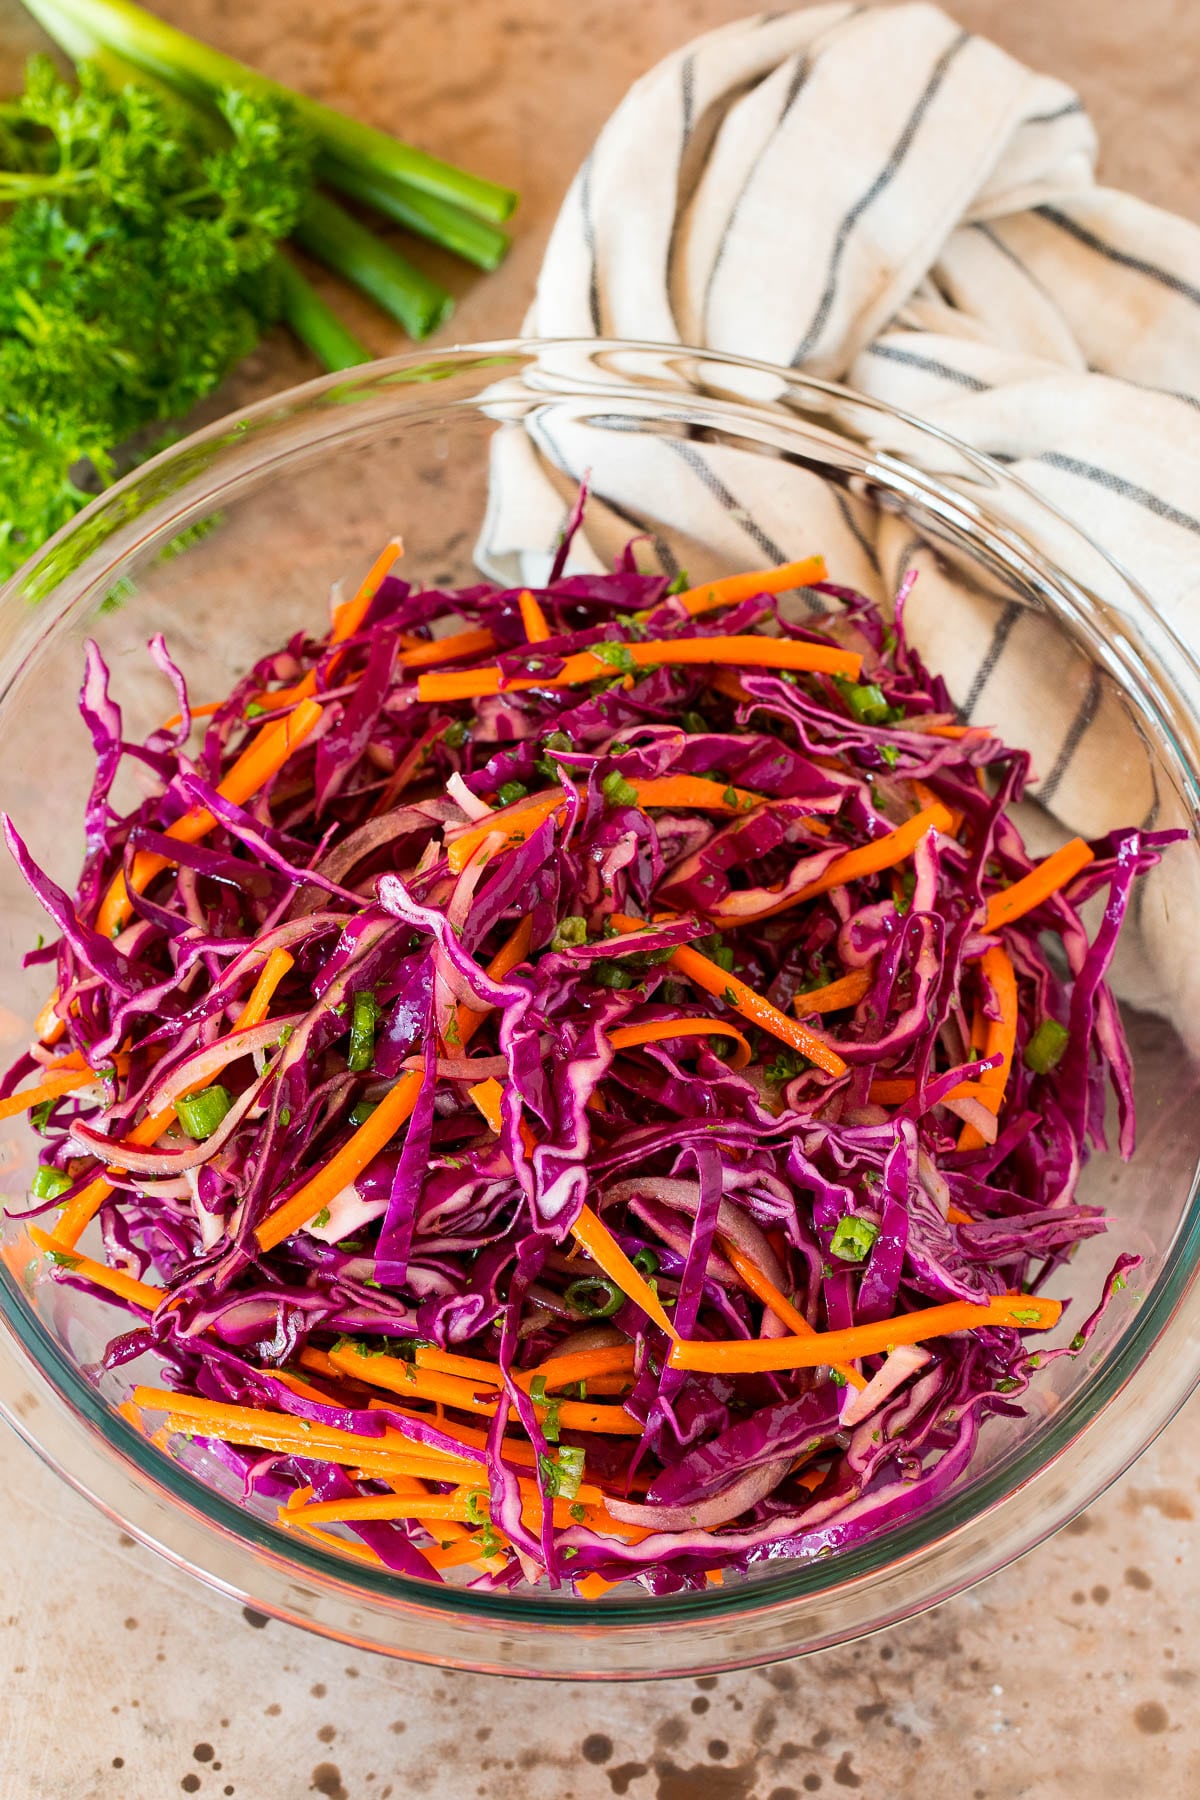 A bowl of red cabbage slaw garnished with fresh herbs.